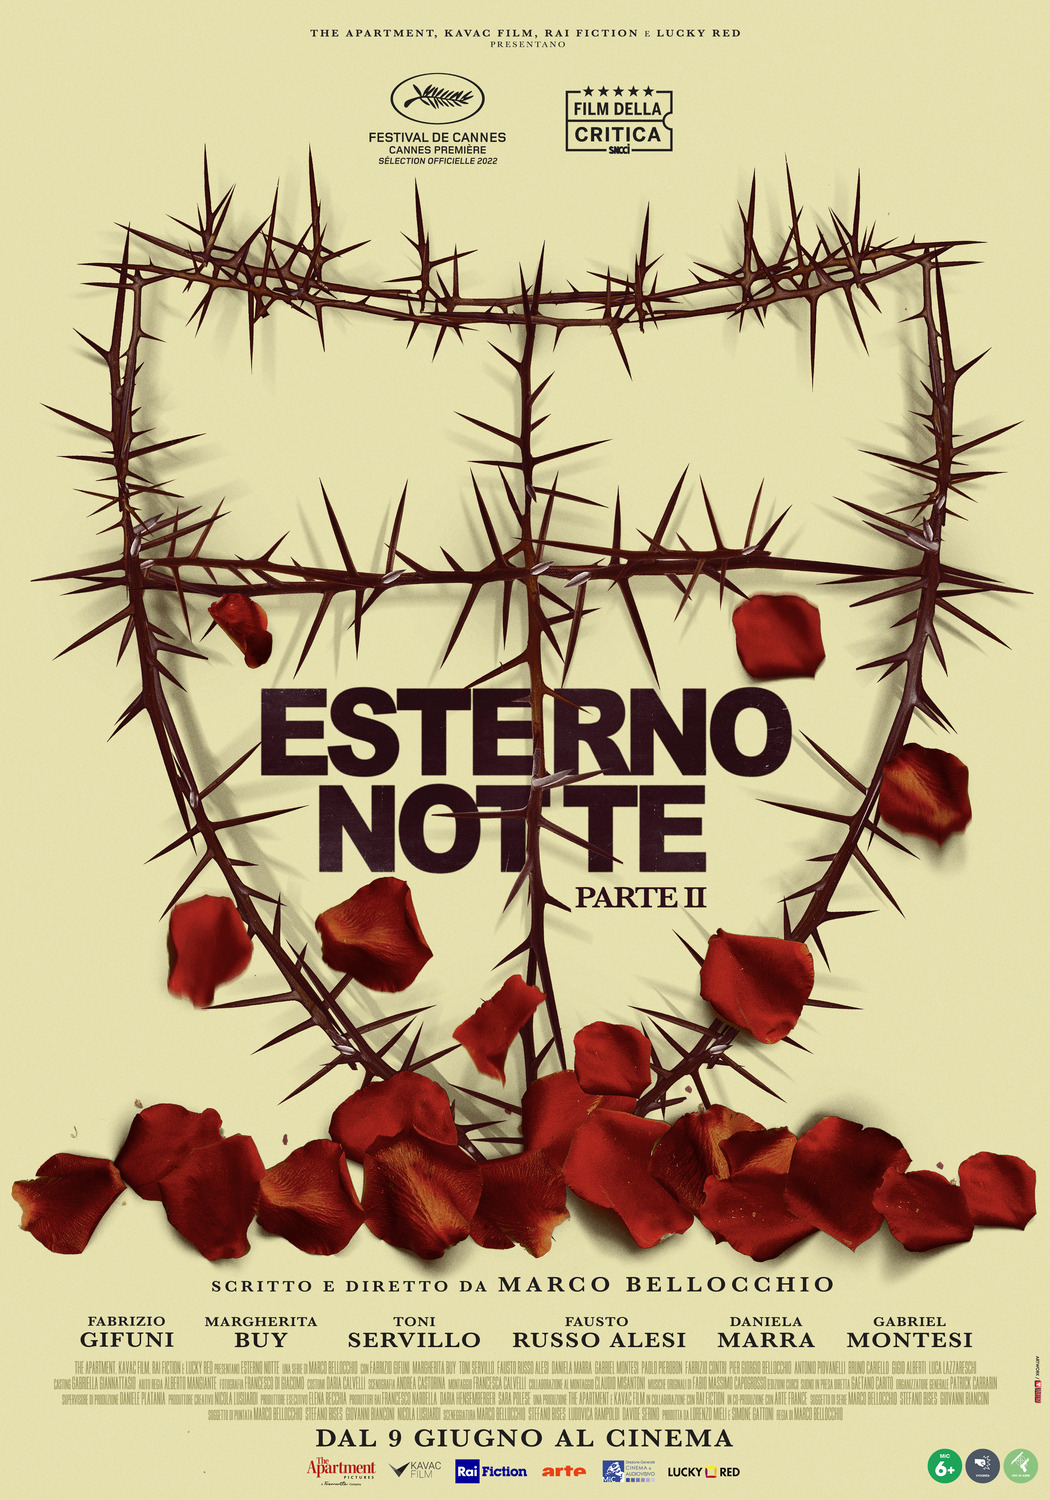 Extra Large Movie Poster Image for Esterno notte Parte II 